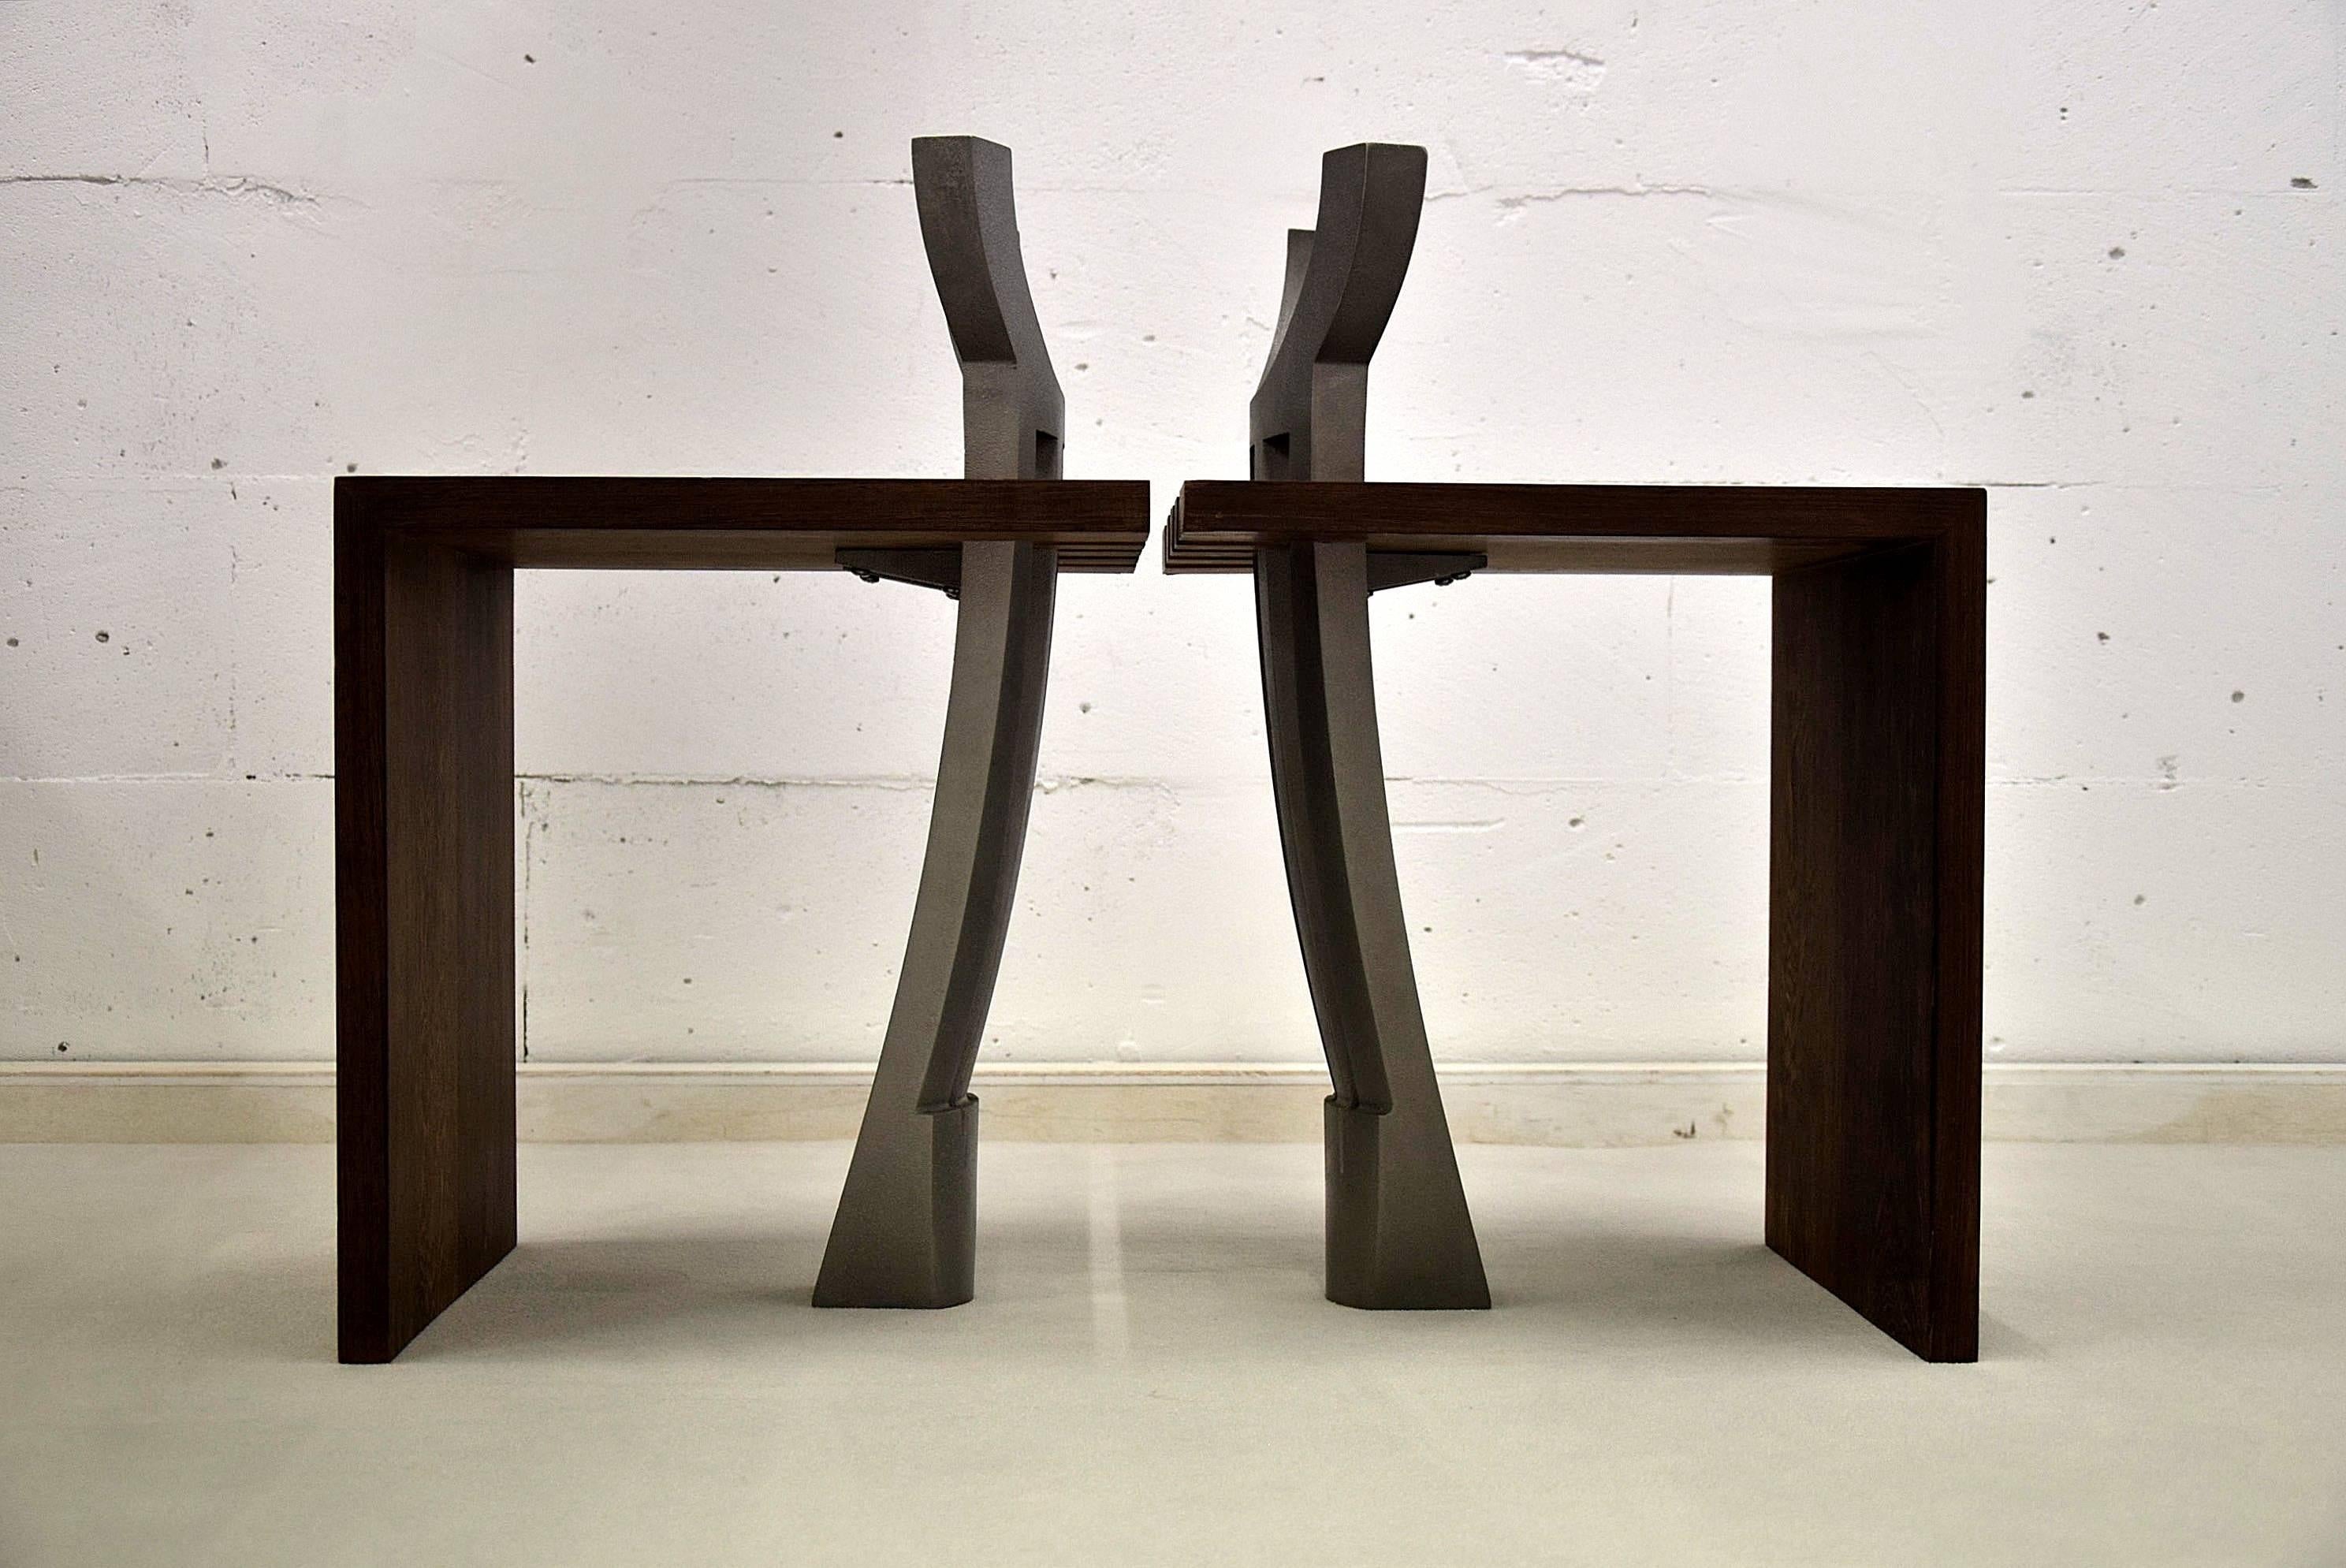 Two very limited edition sculpture stools created in 1998 by Ron van de Ven (1956 Maastricht, the Netherlands).
This pair is numbered 1 & 2 of 15. The artist told me only six pcs were made.
The stools are made of solid wenge and cast